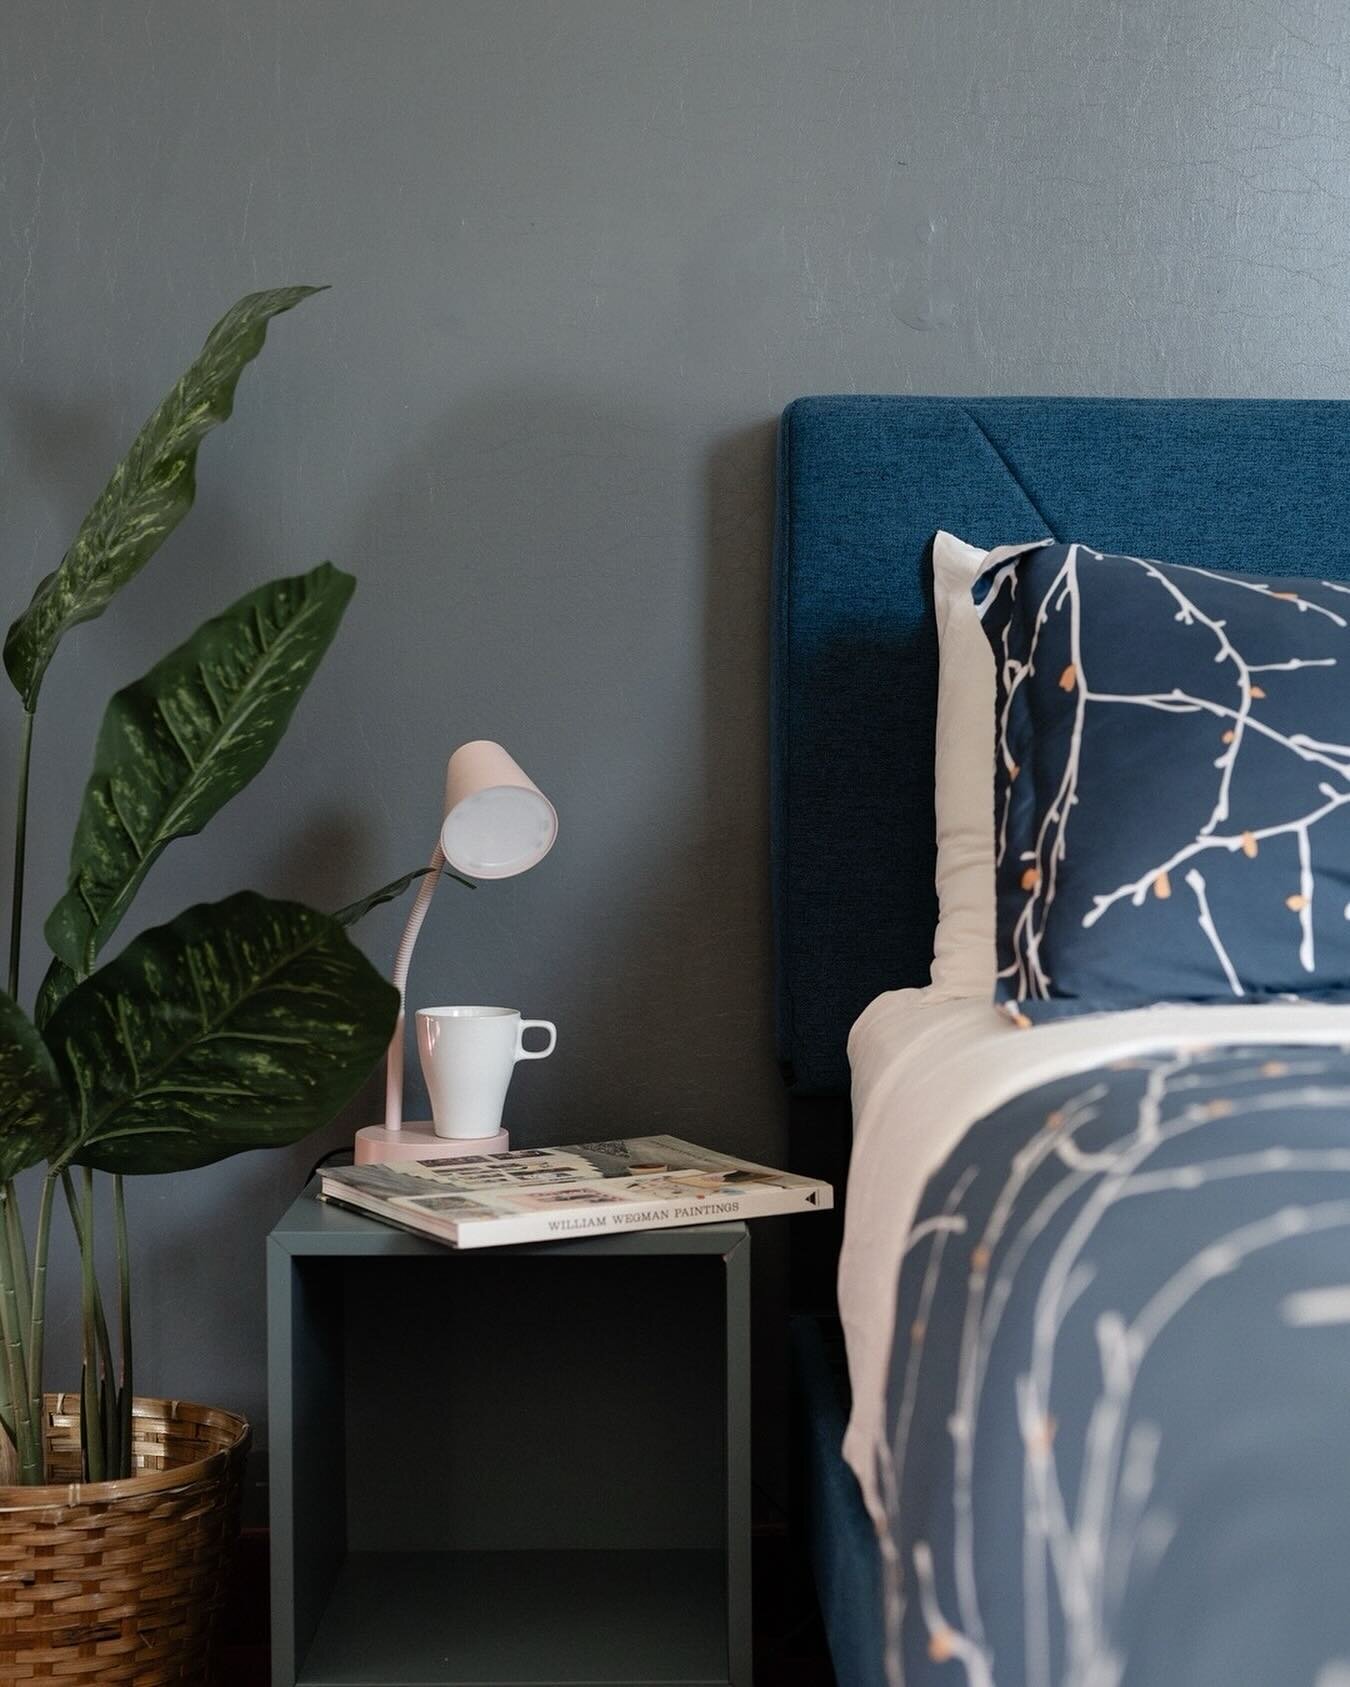 3 things you need on your nightstand...
⠀⠀⠀⠀⠀⠀⠀⠀⠀
☕ A fresh cup of coffee
📖 A good book
💡 A soft glowing lamp 
⠀⠀⠀⠀⠀⠀⠀⠀⠀
Escape the every day hustle and bustle relaxing in your home away from home.
⠀⠀⠀⠀⠀⠀⠀⠀⠀
Book your Sweet Digs today!
💻 www.sweet